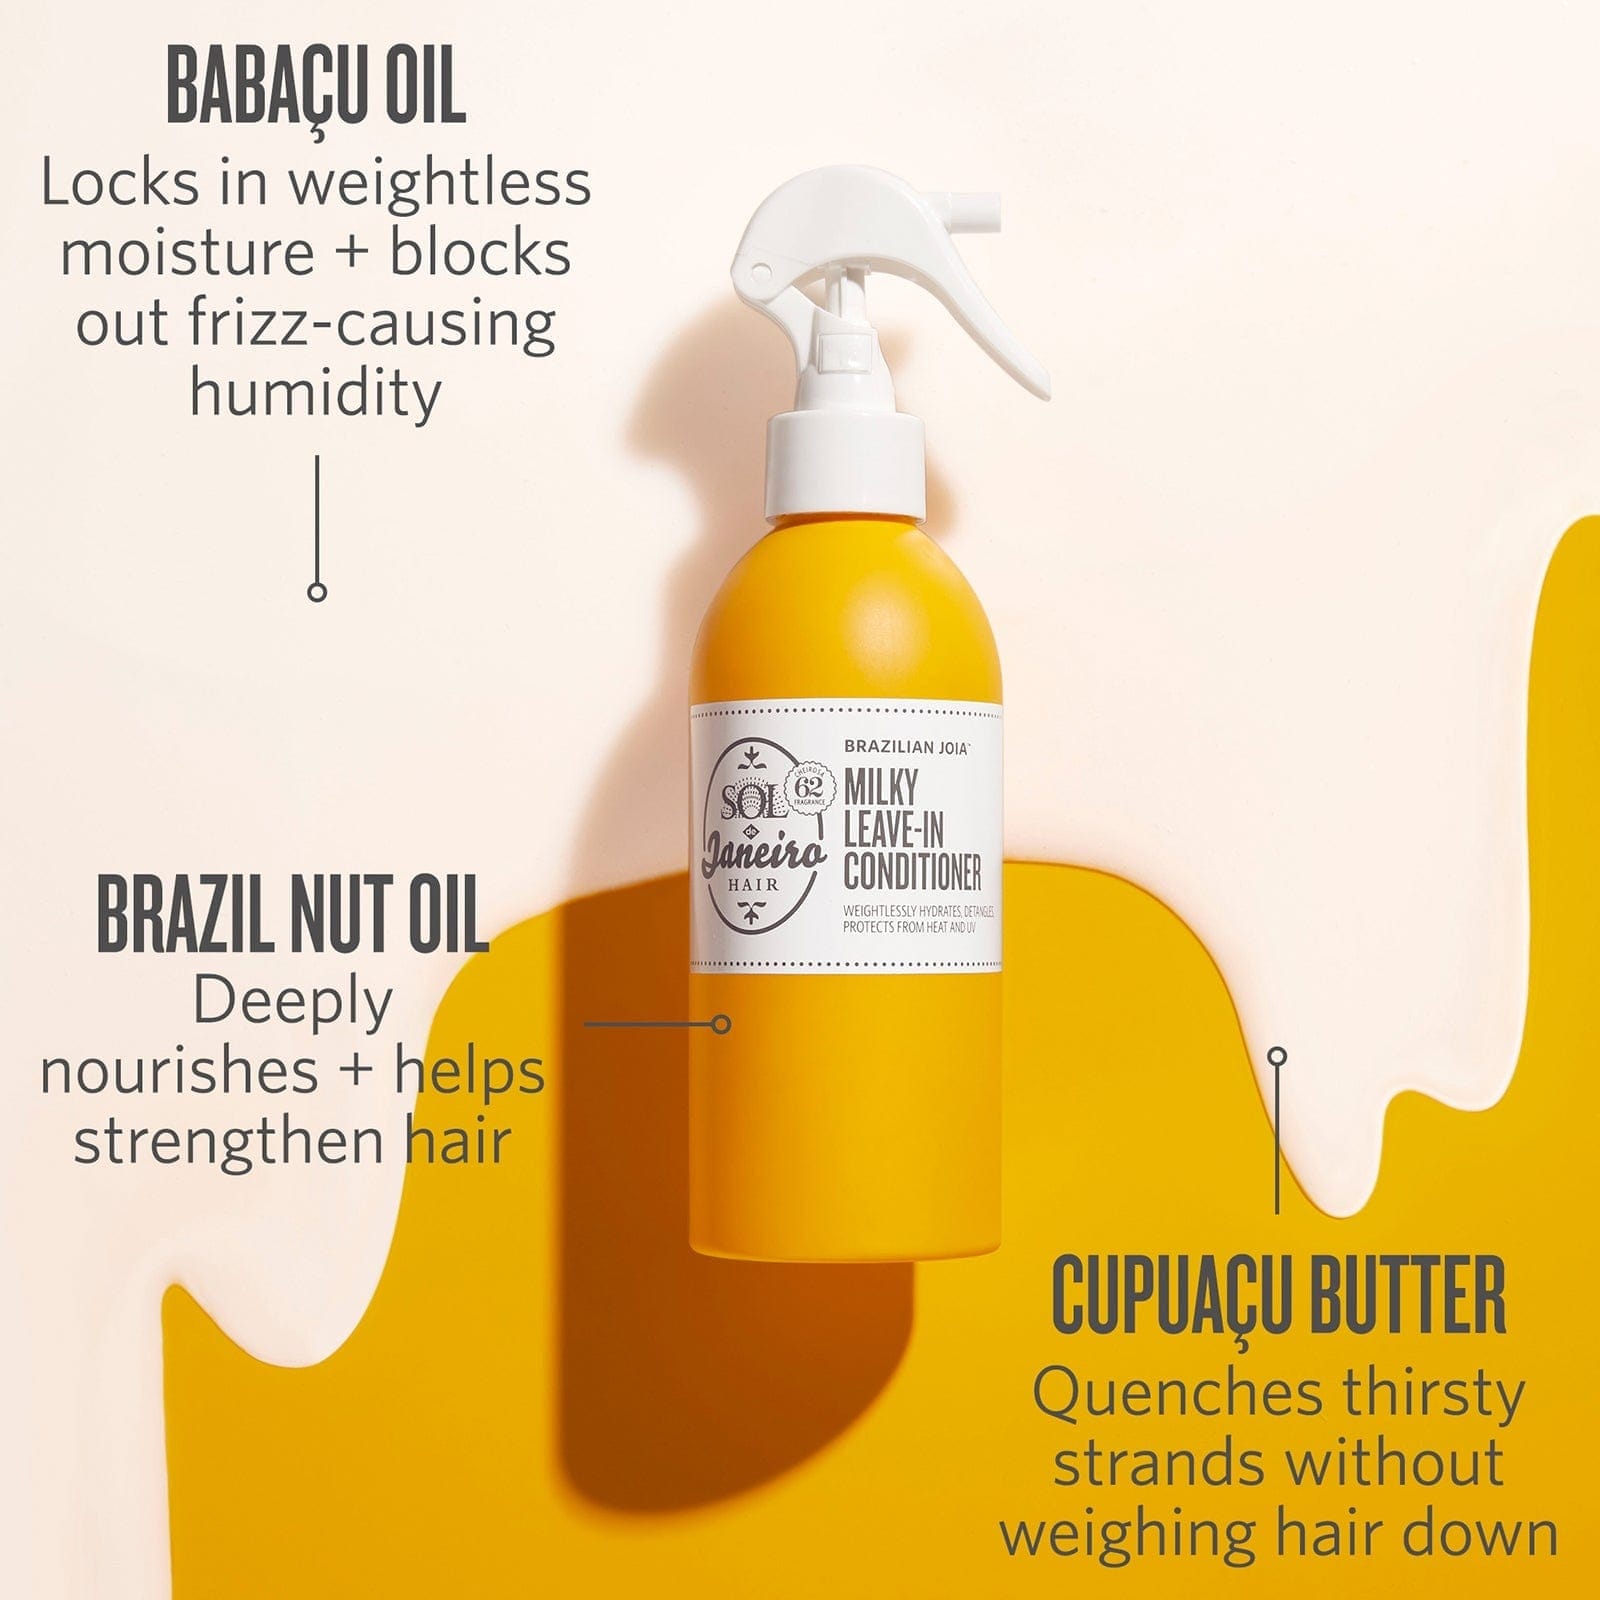 Babacu oil locks in weightless moisture + blocks out frizz-causing humidity. Brazil nut oil - deeply nourishes + helps strengthen hair. Cupuacu butter - quenches thirsty strands without weighing hair down 